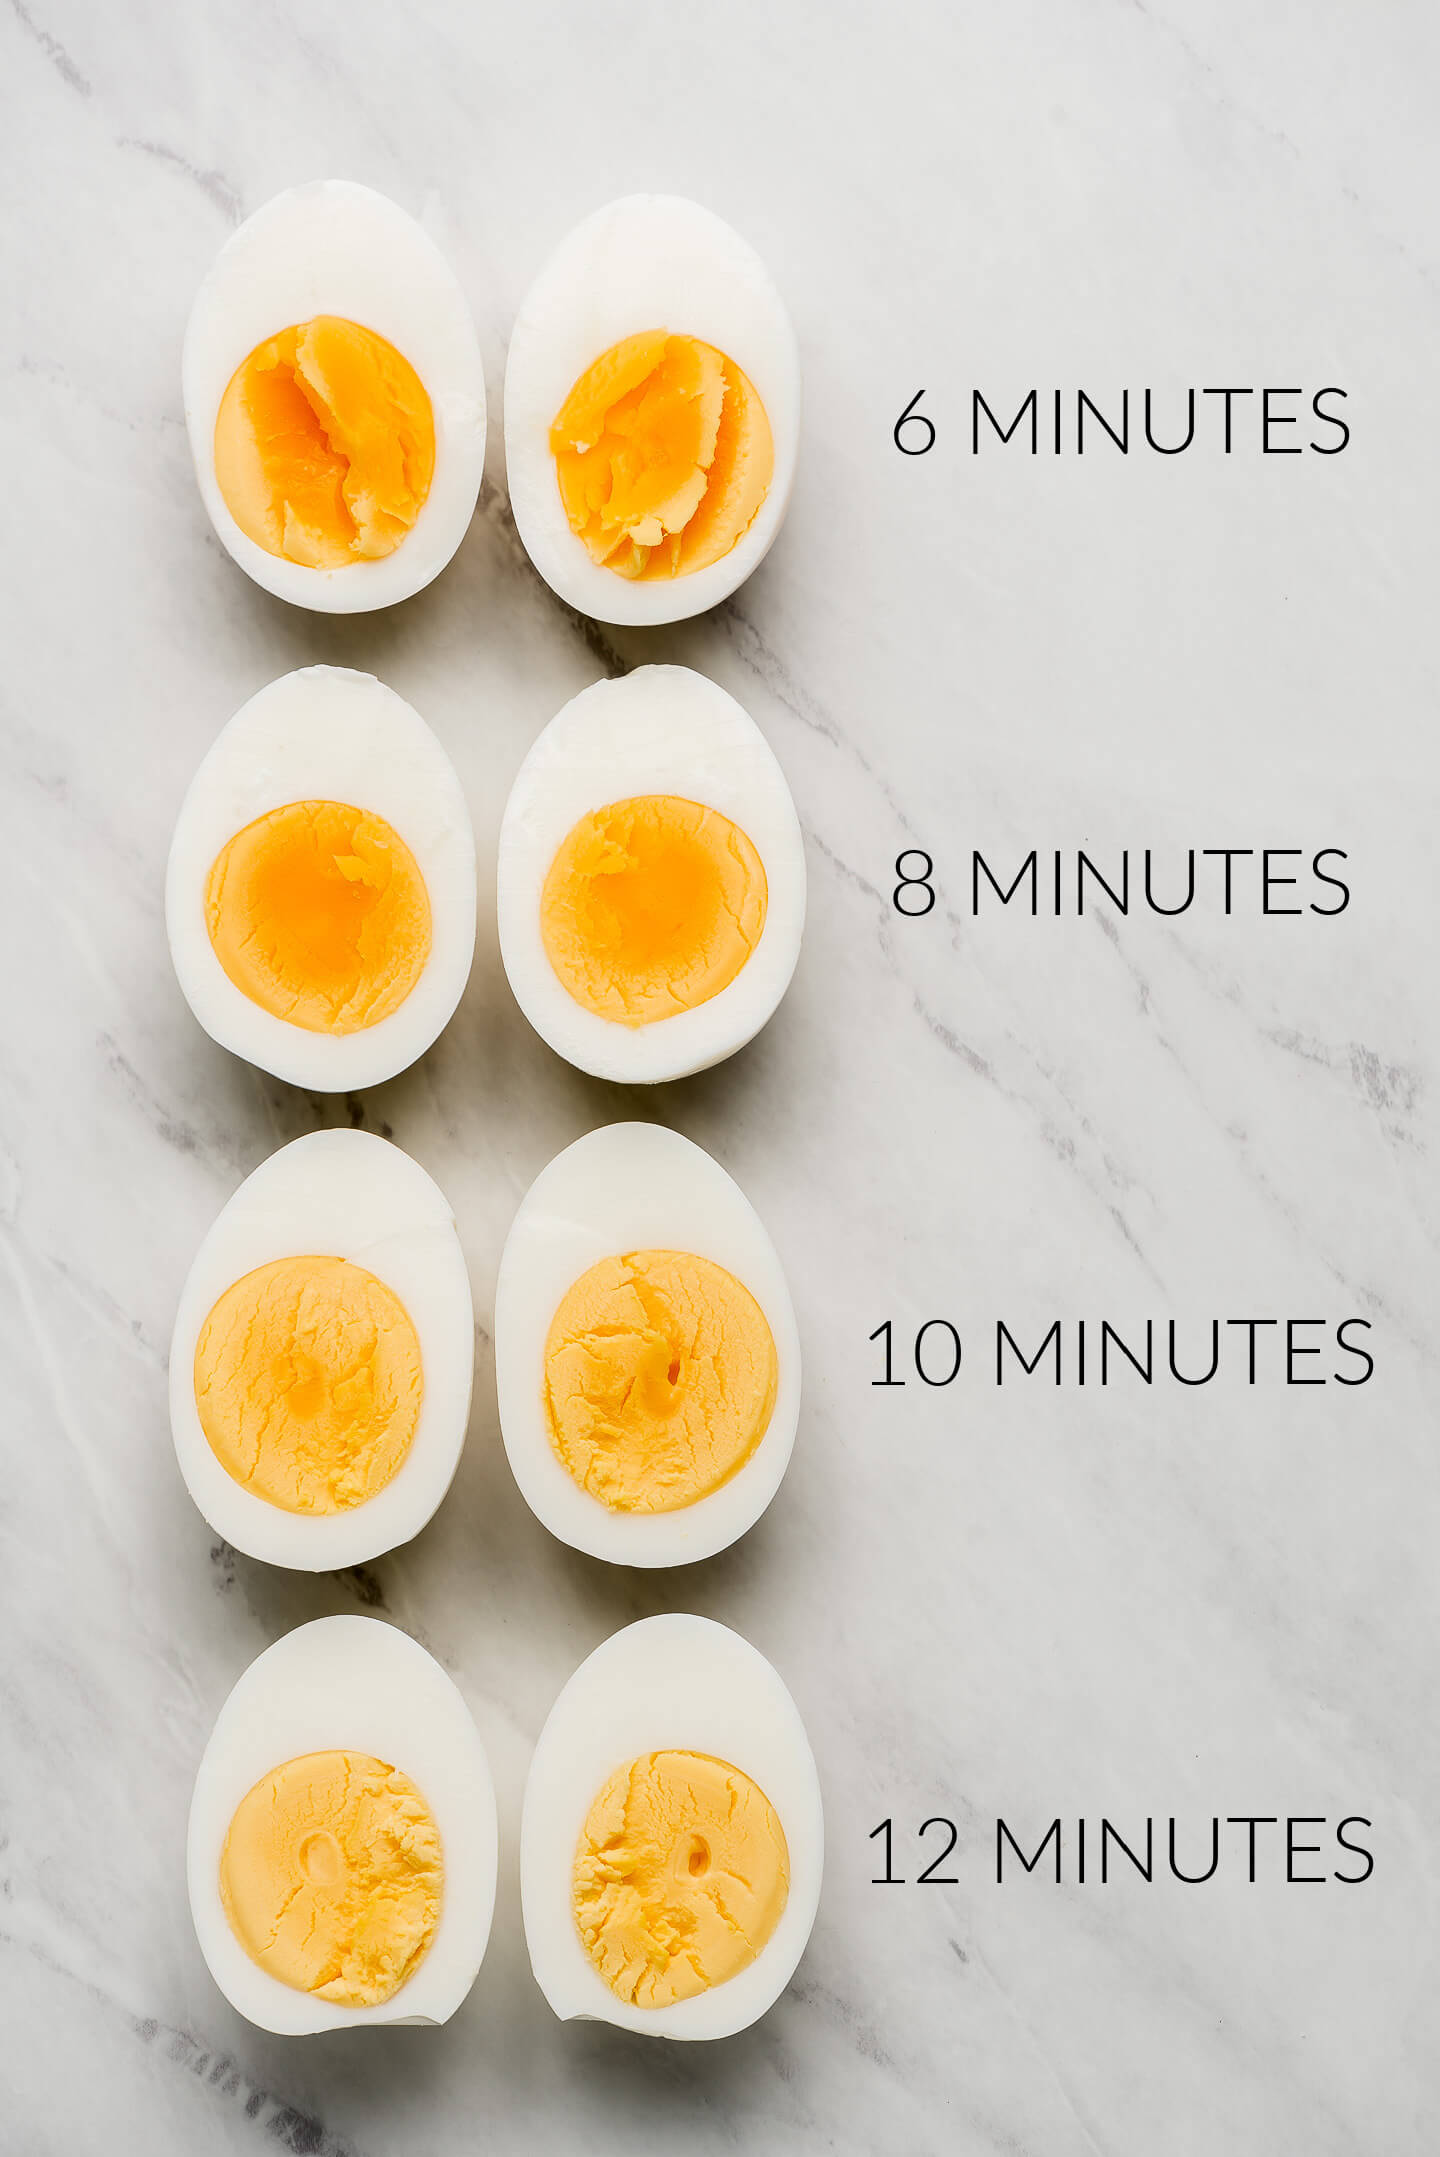 Hard Boiled eggs with various yolk doneness and chart of times beside eggs.